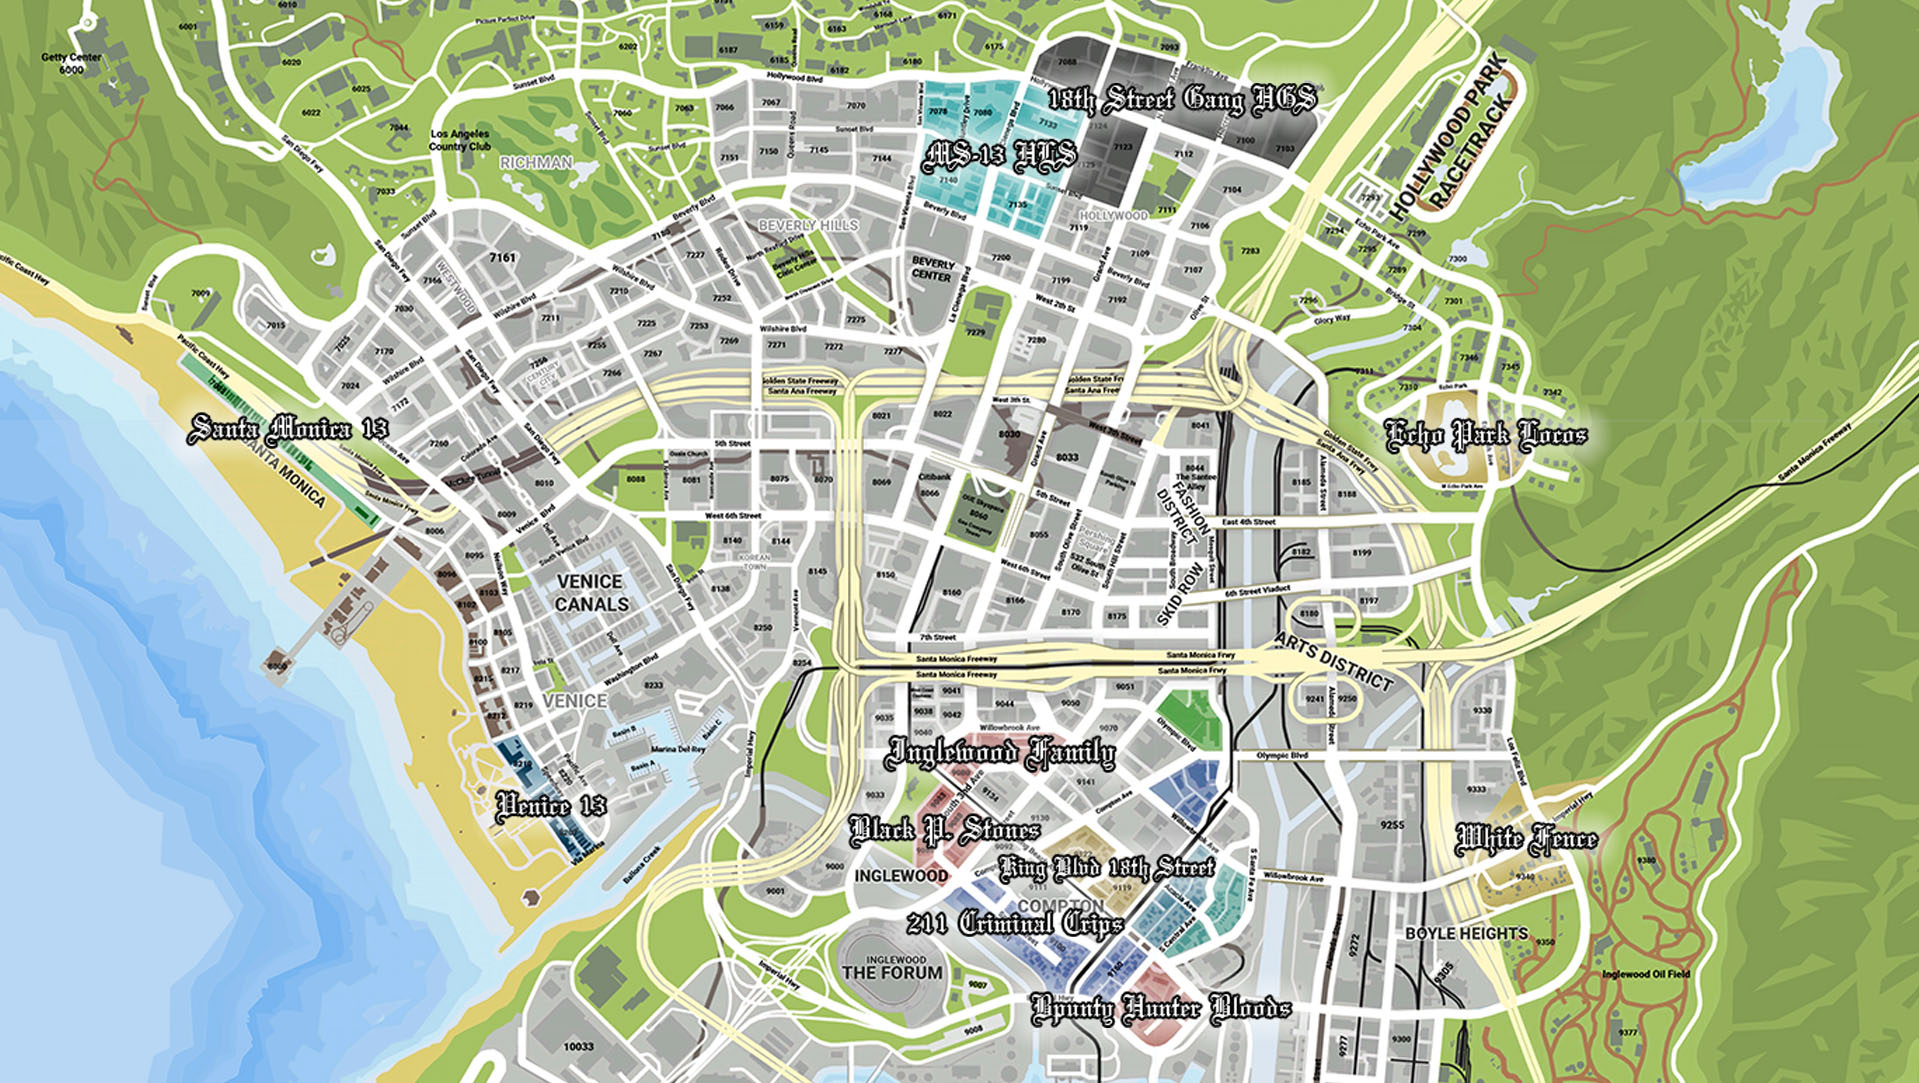 Gta 5 map with street names (117) фото